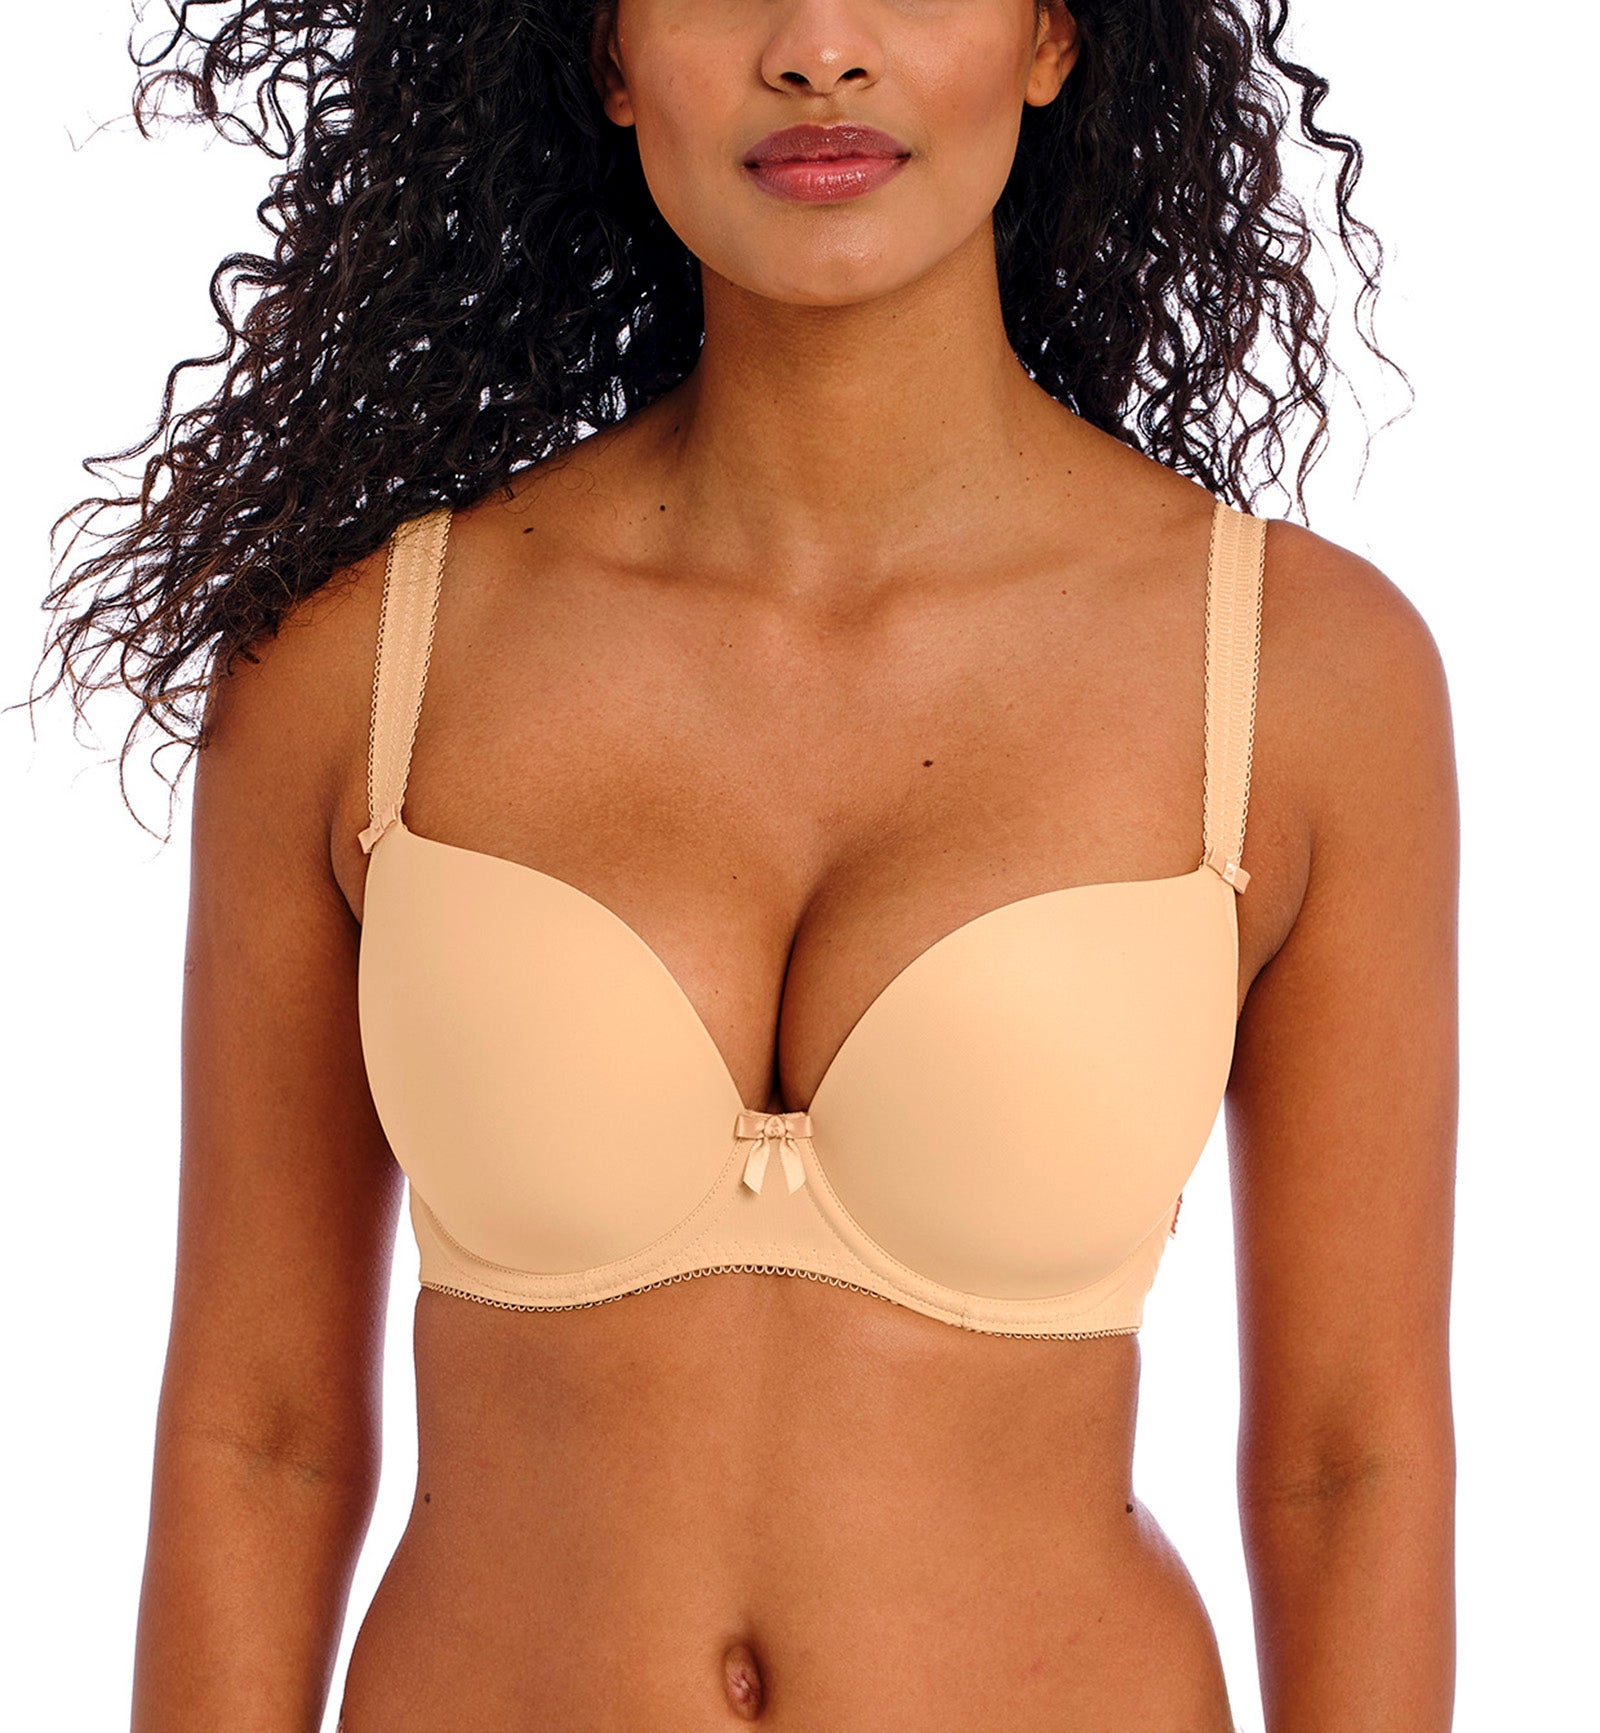 Freya Deco Moulded Plunge Underwire Bra (4234),28D,Nude - Nude,28D